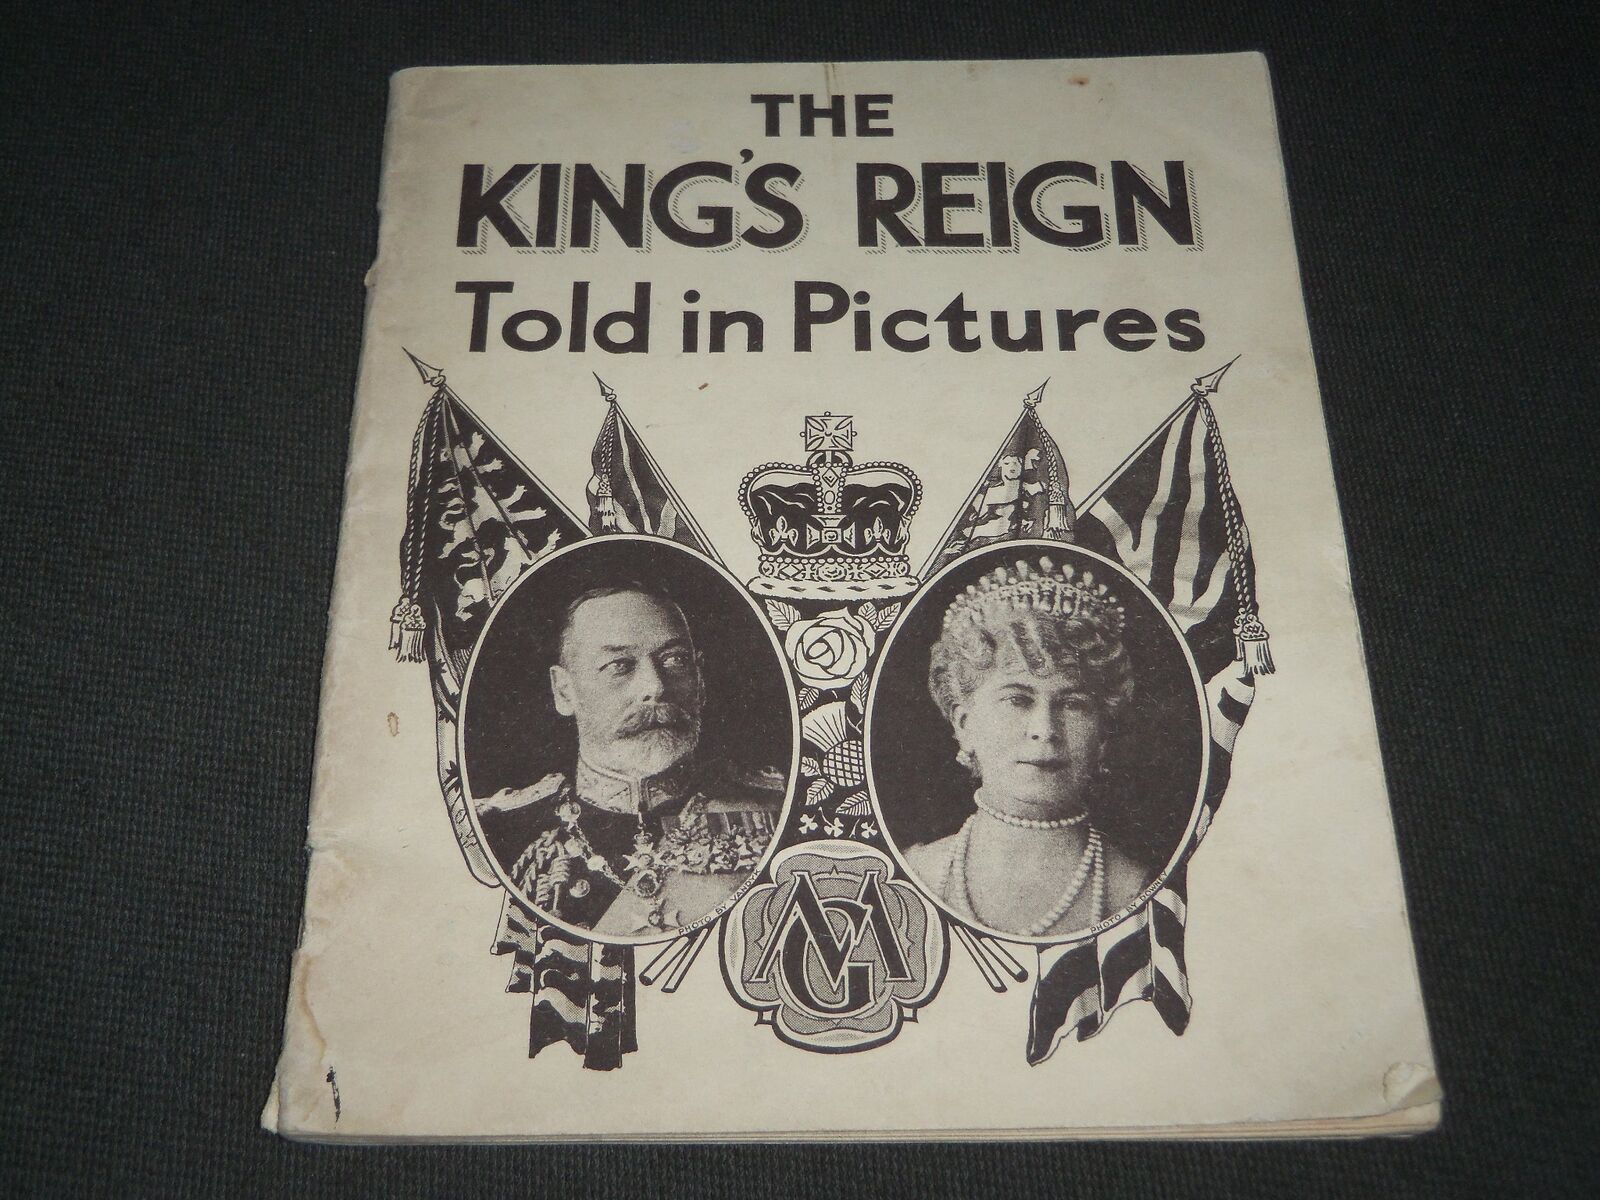 1935 THE KING'S REIGN TOLD IN PICTURES PROGRAM - GREAT PHOTOS - J 2825